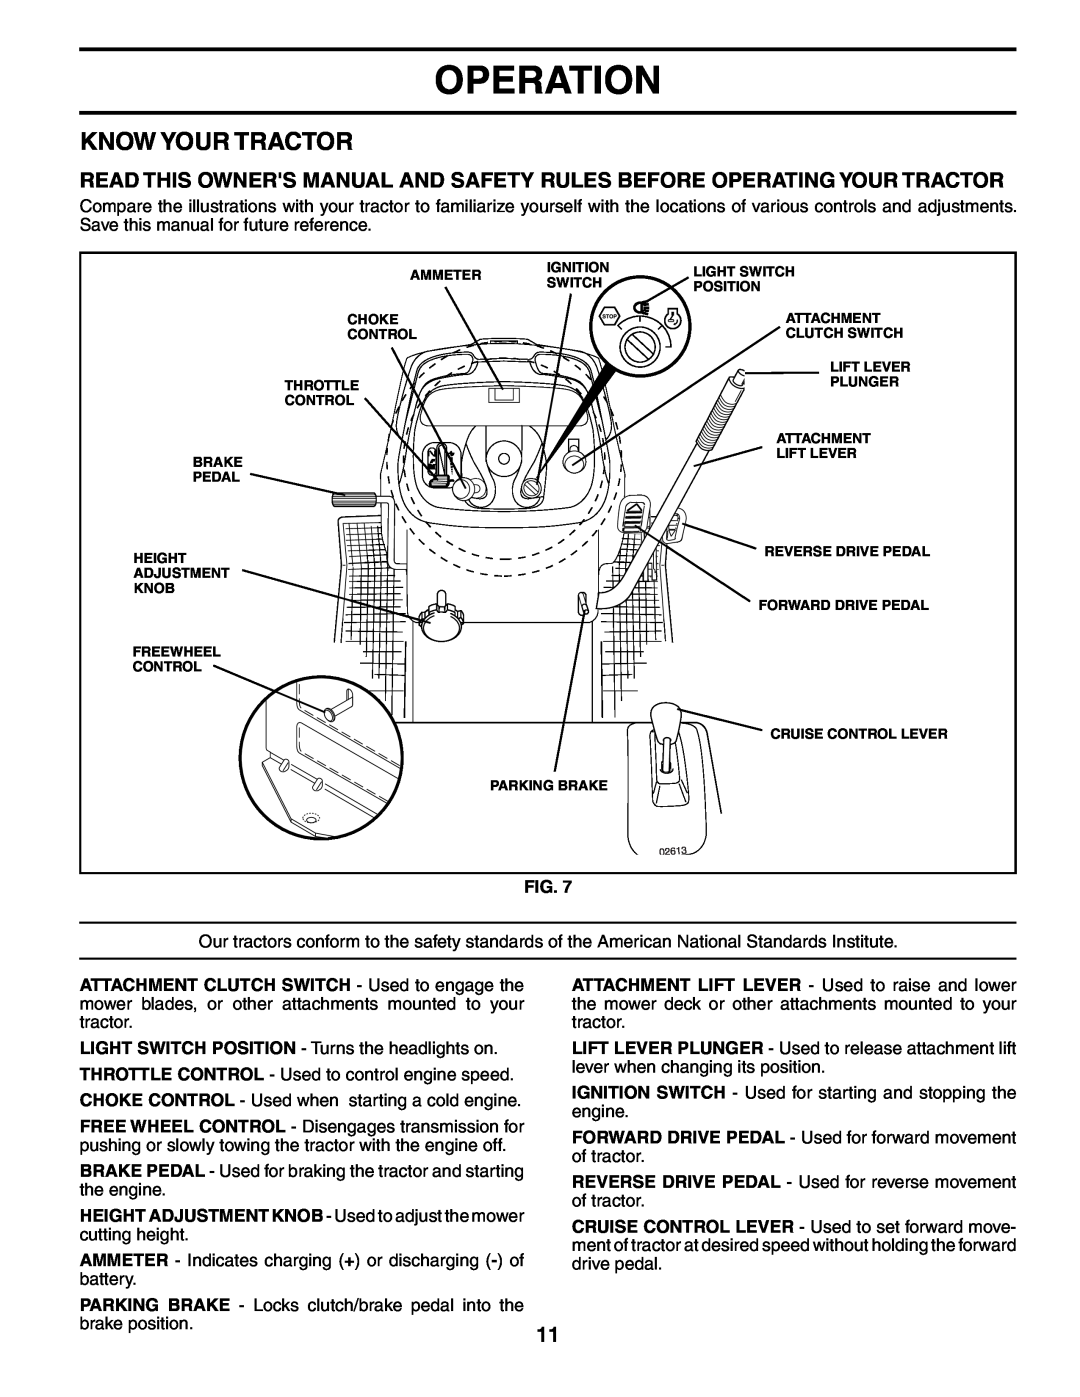 Poulan 187009 owner manual Know Your Tractor, Operation, HEIGHT ADJUSTMENT KNOB - Used to adjust the mower cutting height 